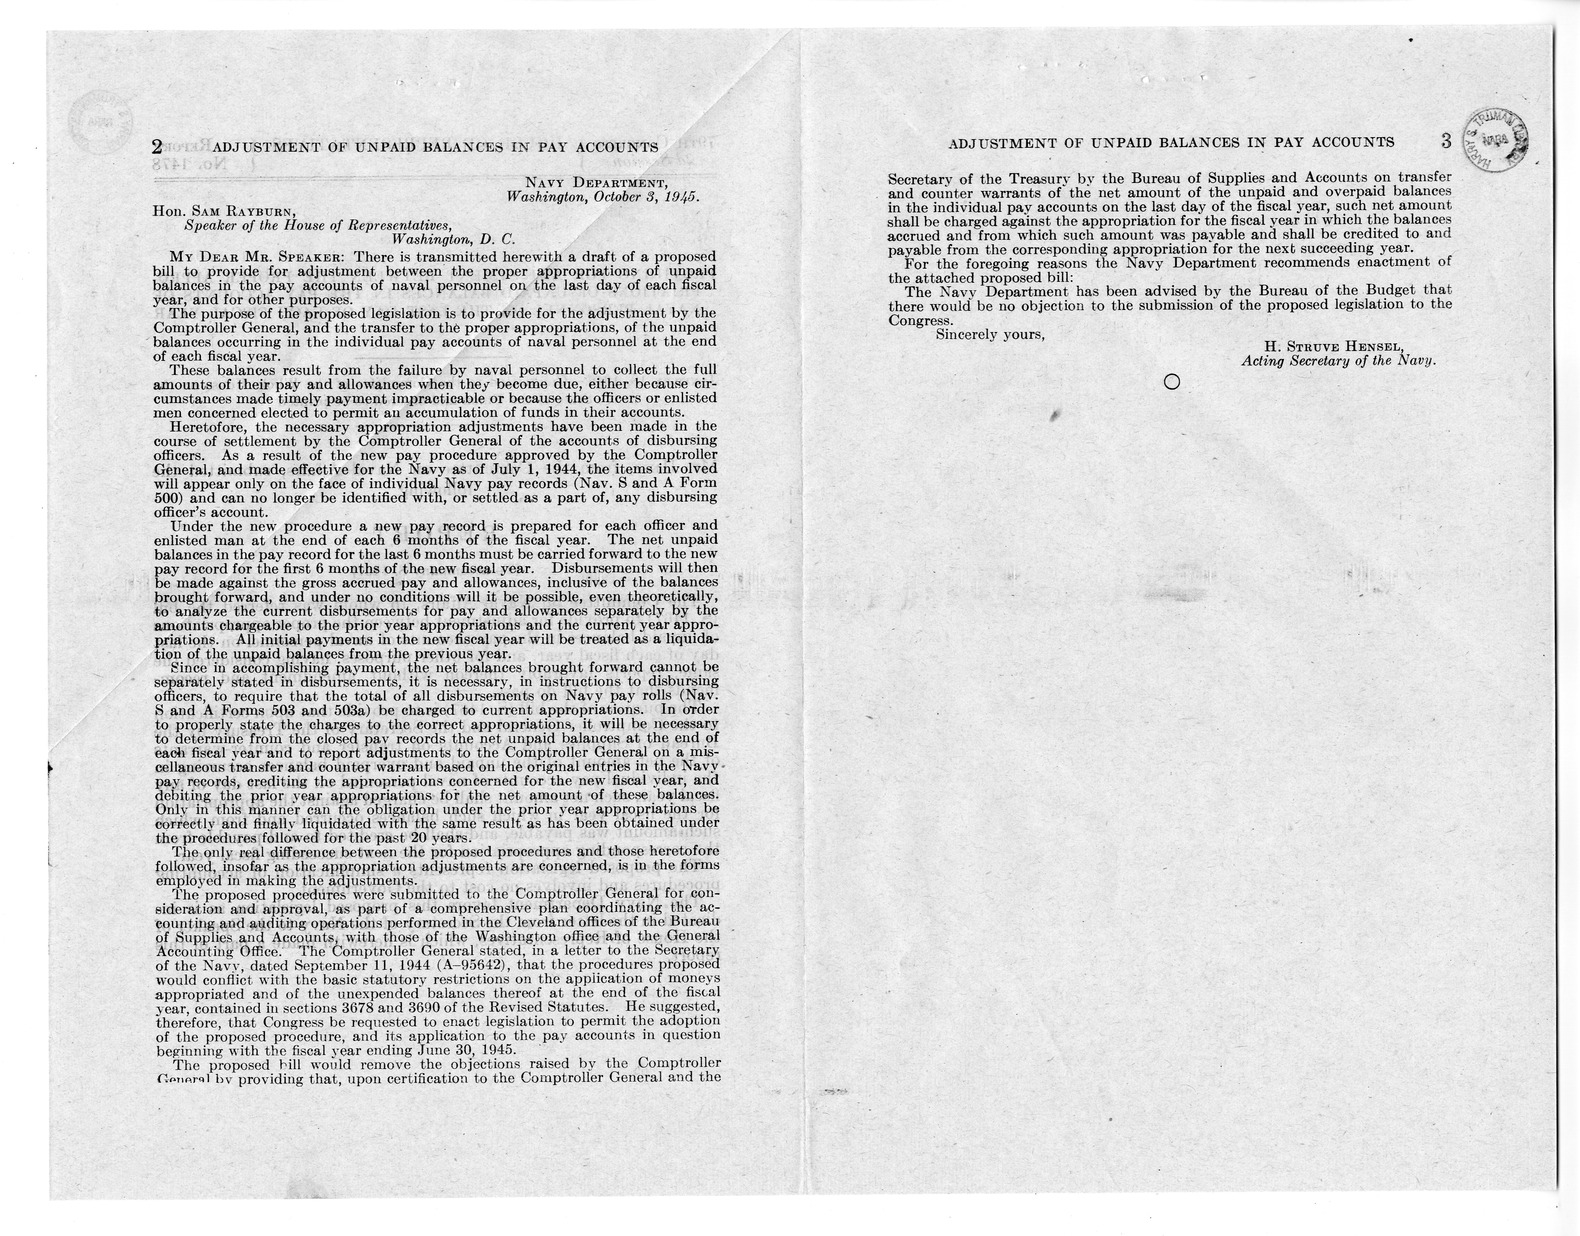 Memorandum from Frederick J. Bailey to M. C. Latta, S. 1467, To Provide for Adjustment Between the Proper Appropriations, of Unpaid Balances of the Pay Accounts of Naval Personnel on the Last Day of Each Fiscal Year, and for Other Purposes, with Attachments